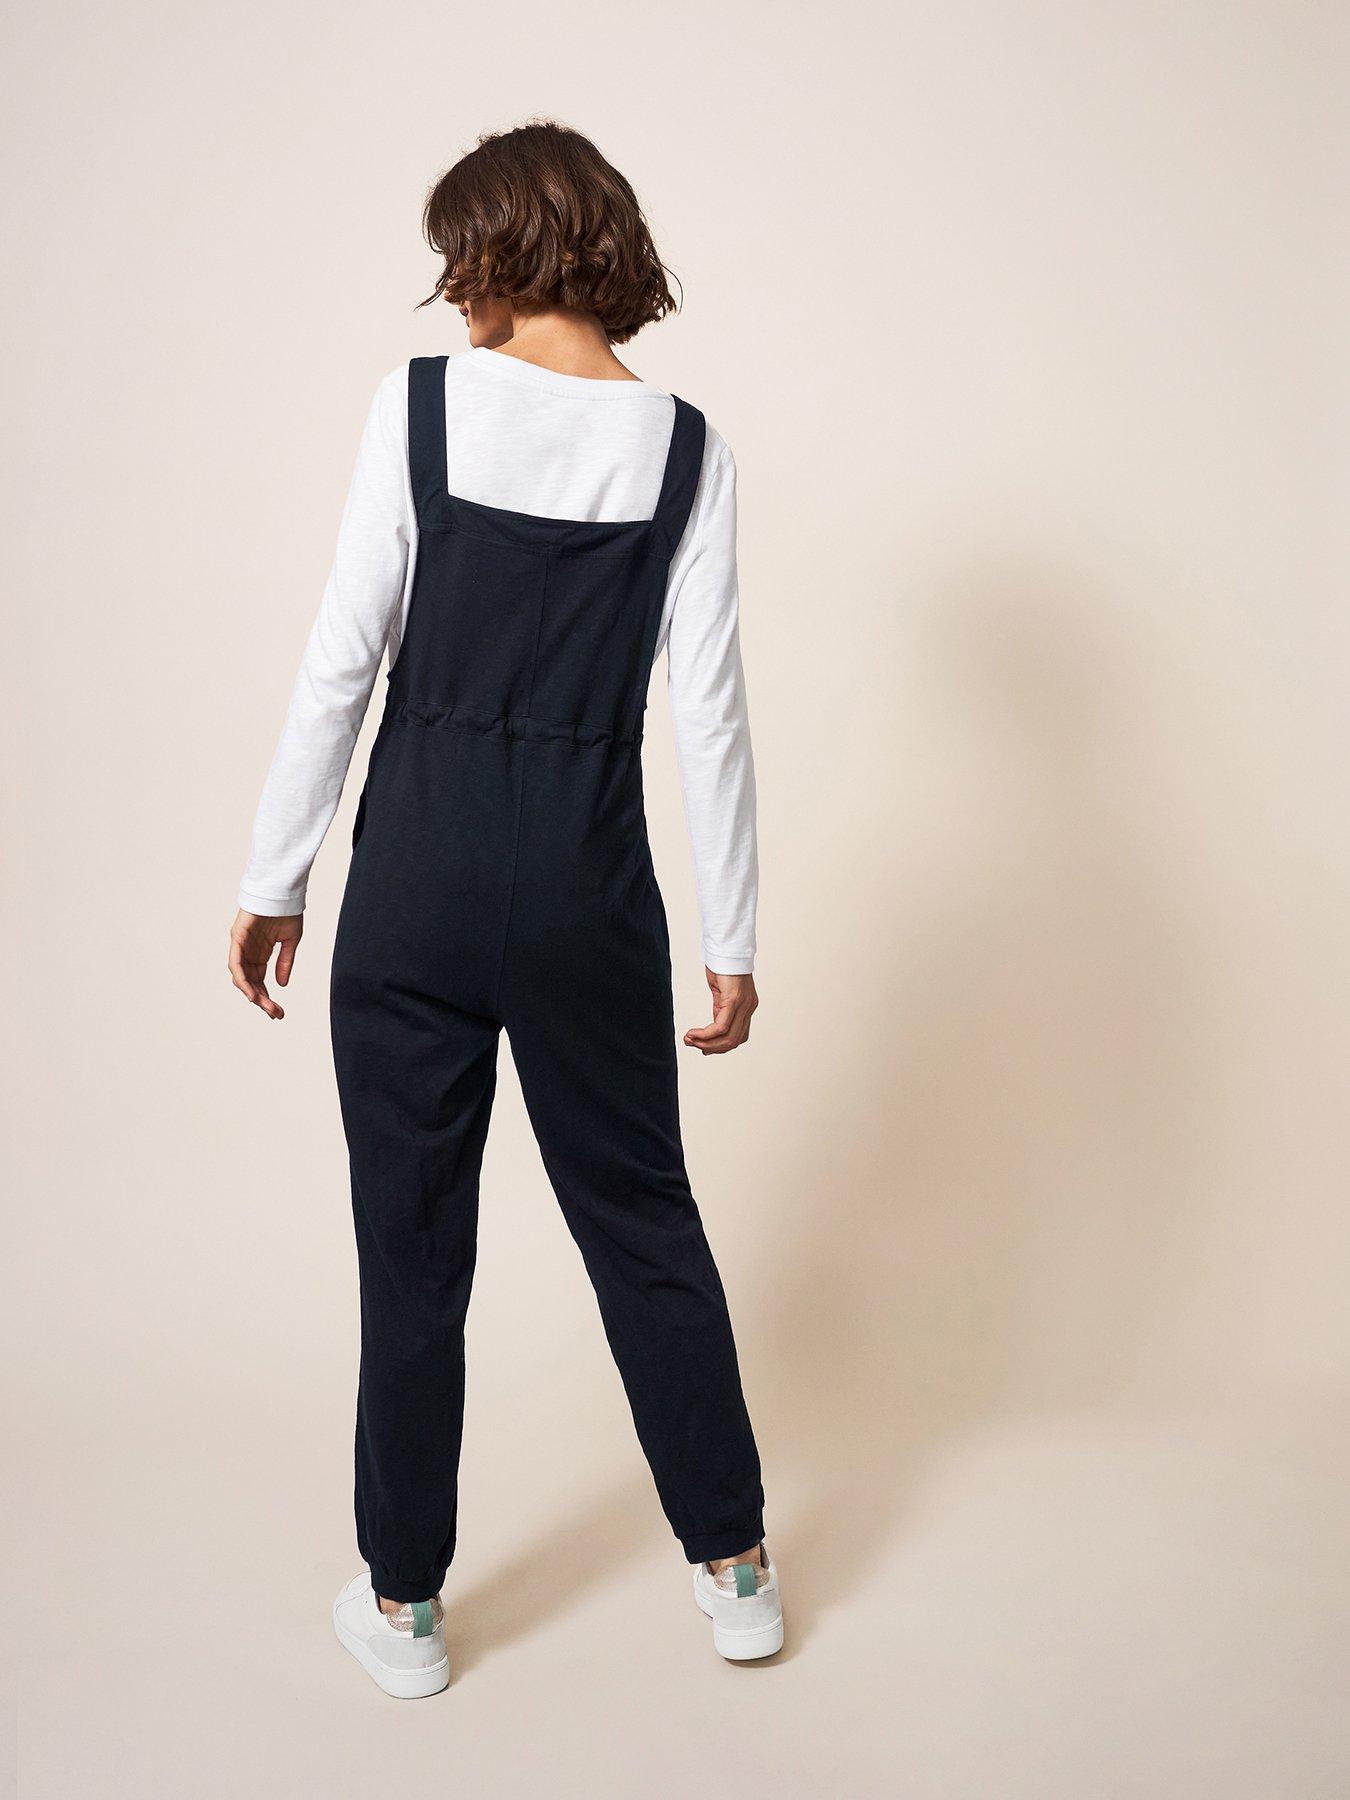 Daphne Jersey Dungaree in PURE BLACK